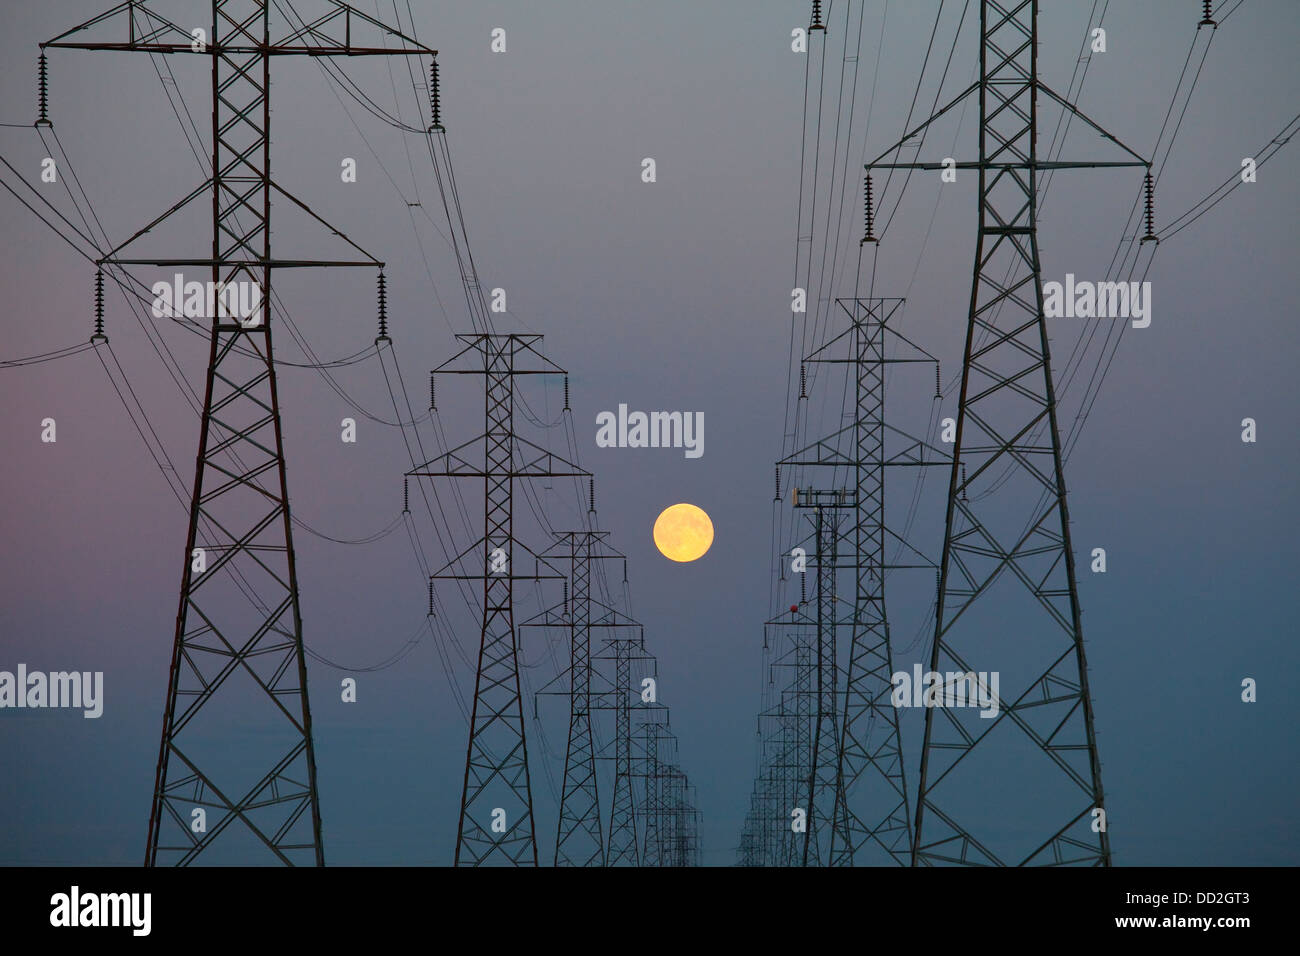 Power Transmission Lines At Dusk; Beaumont, Alberta, Canada Stock Photo